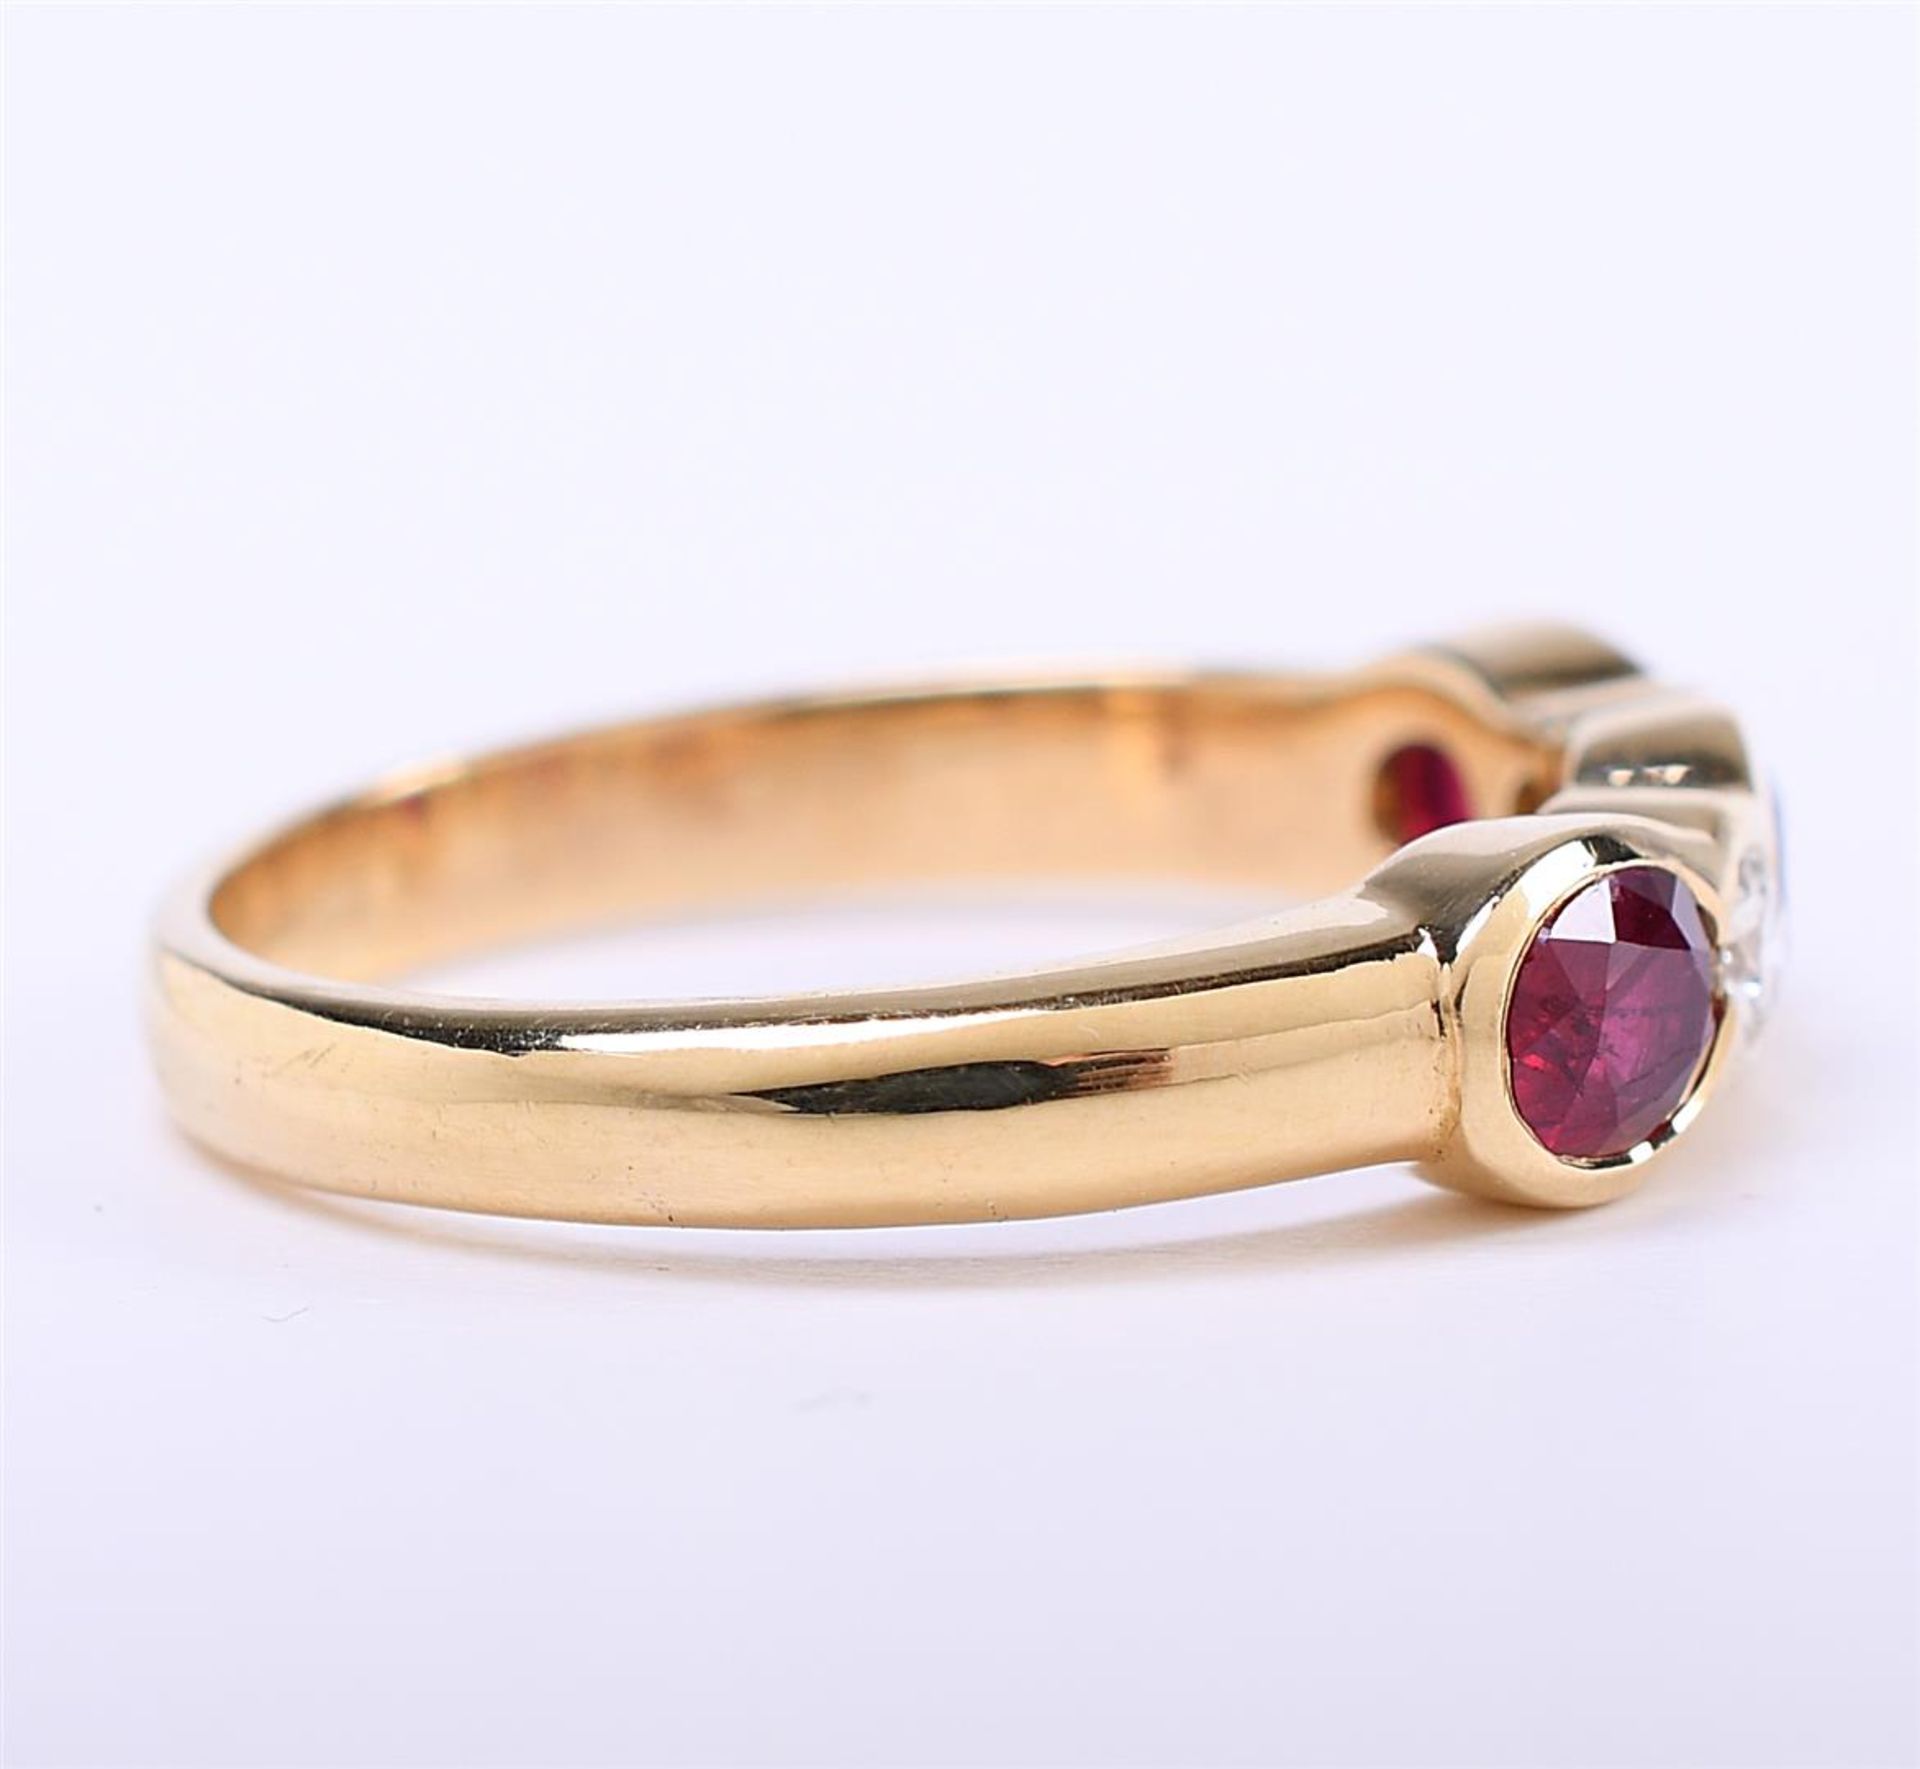 18 carat yellow gold ladies ring set with approximately 3 x oval cut rubies - Image 4 of 5